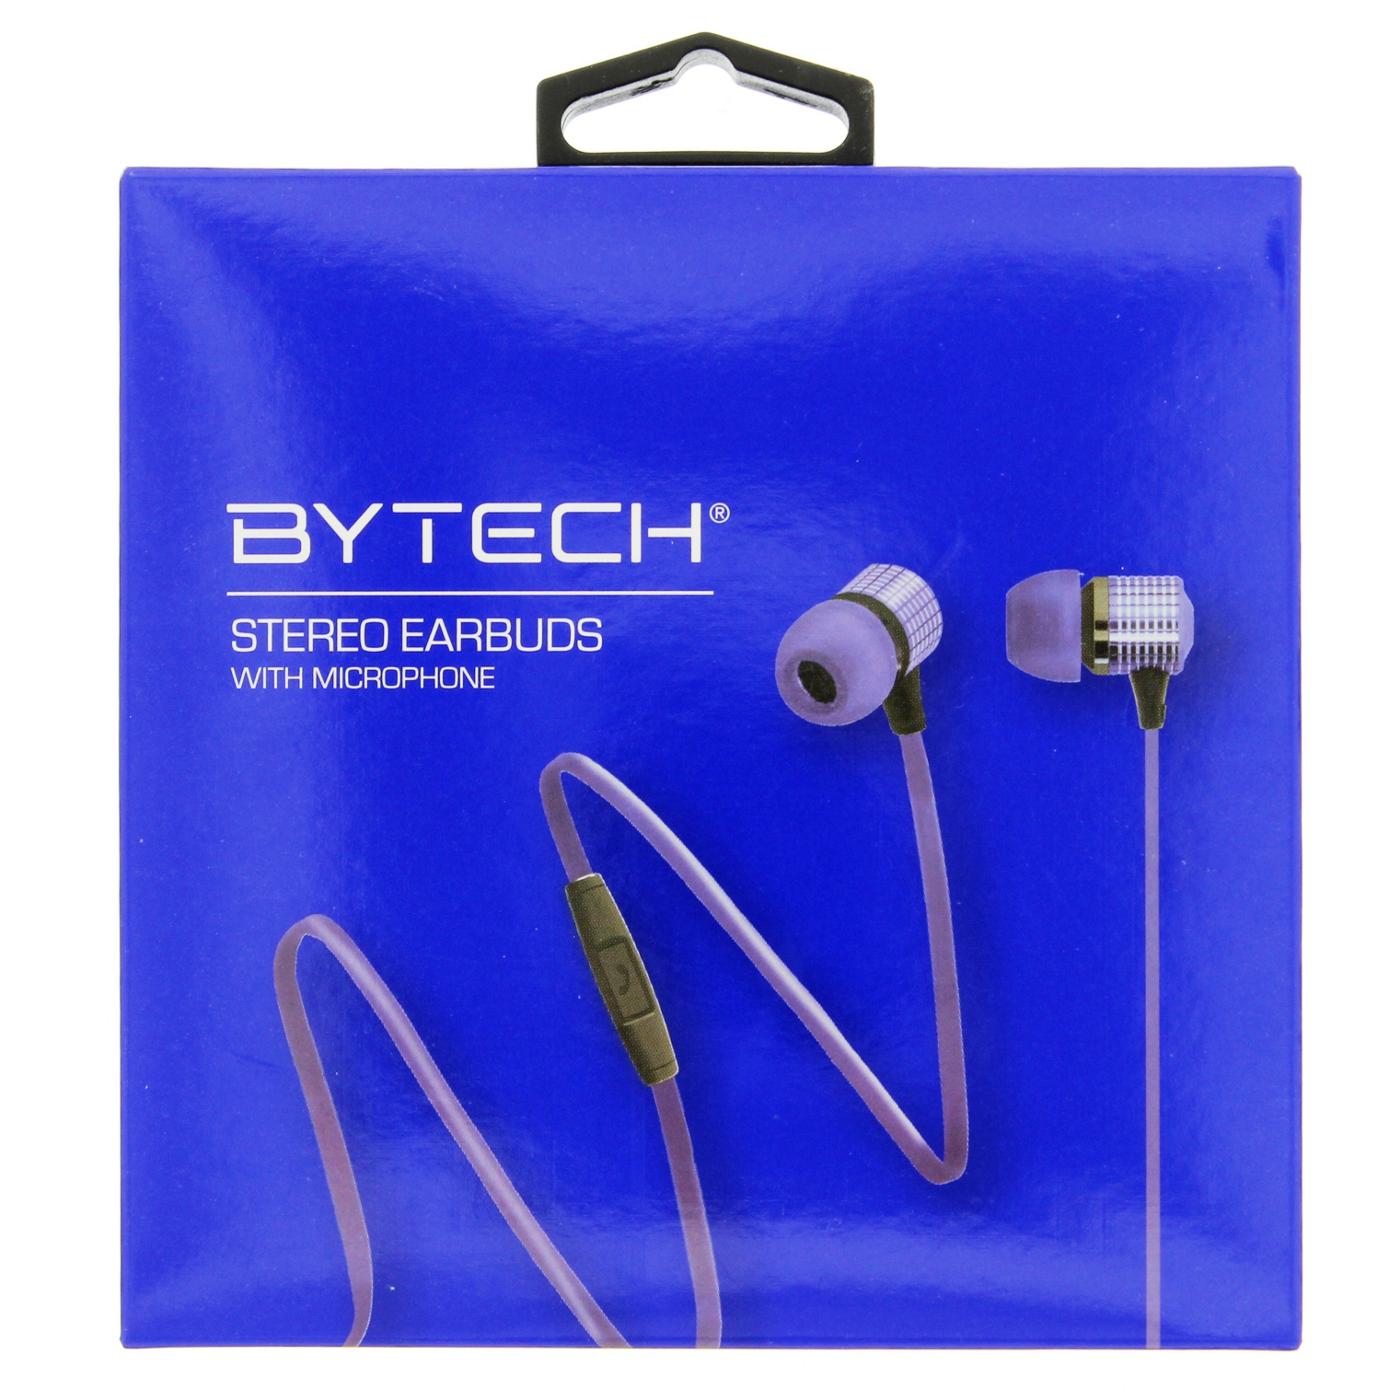 Bytech Stereo Earbuds with Mic - Blue; image 1 of 2